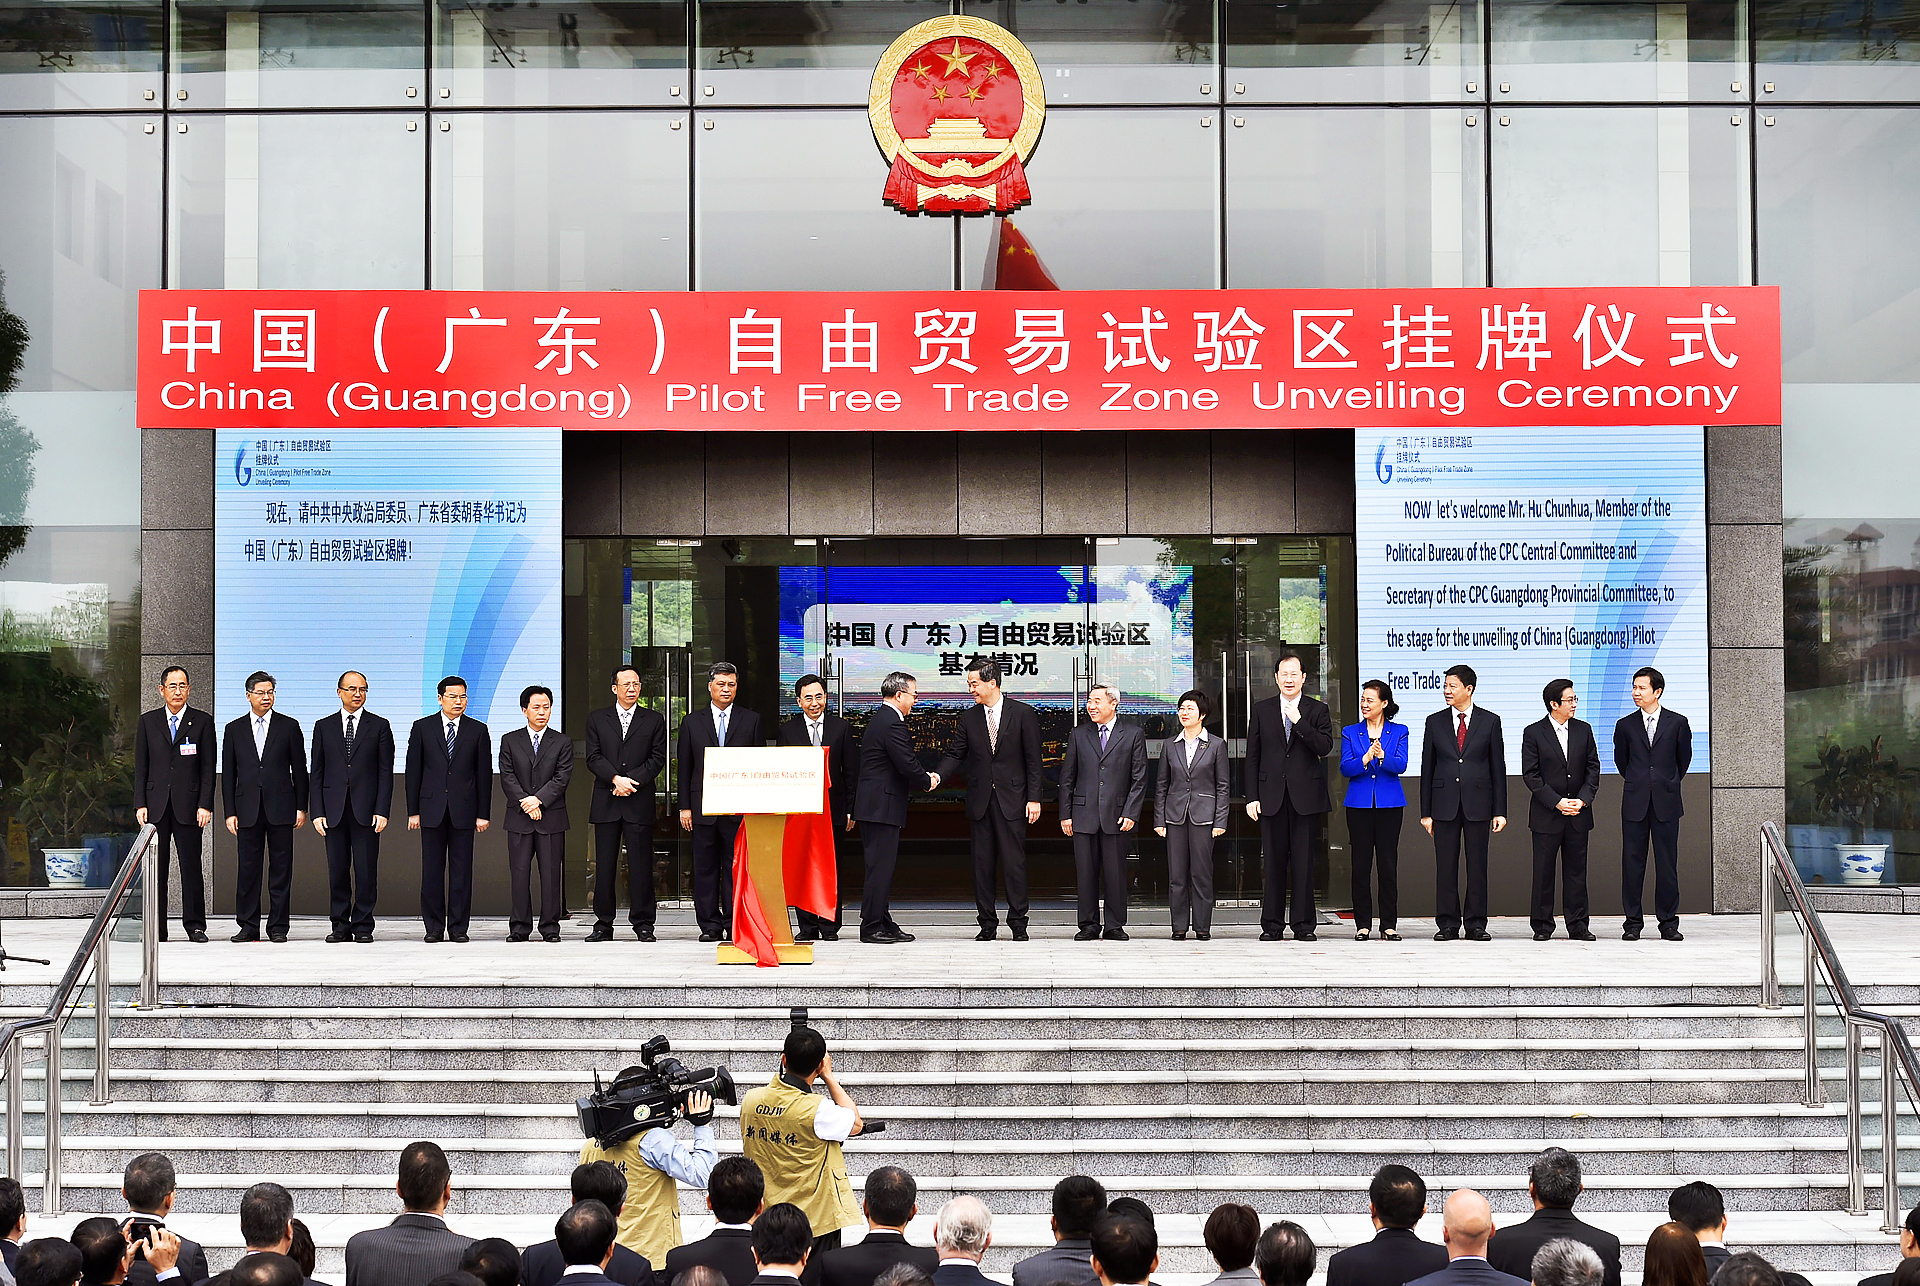 The unveiling ceremony of the China (Guangdong) Pilot Free Trade Zone is held in Guangzhou, capital of south China's Guangdong Province. Photo: Xinhua